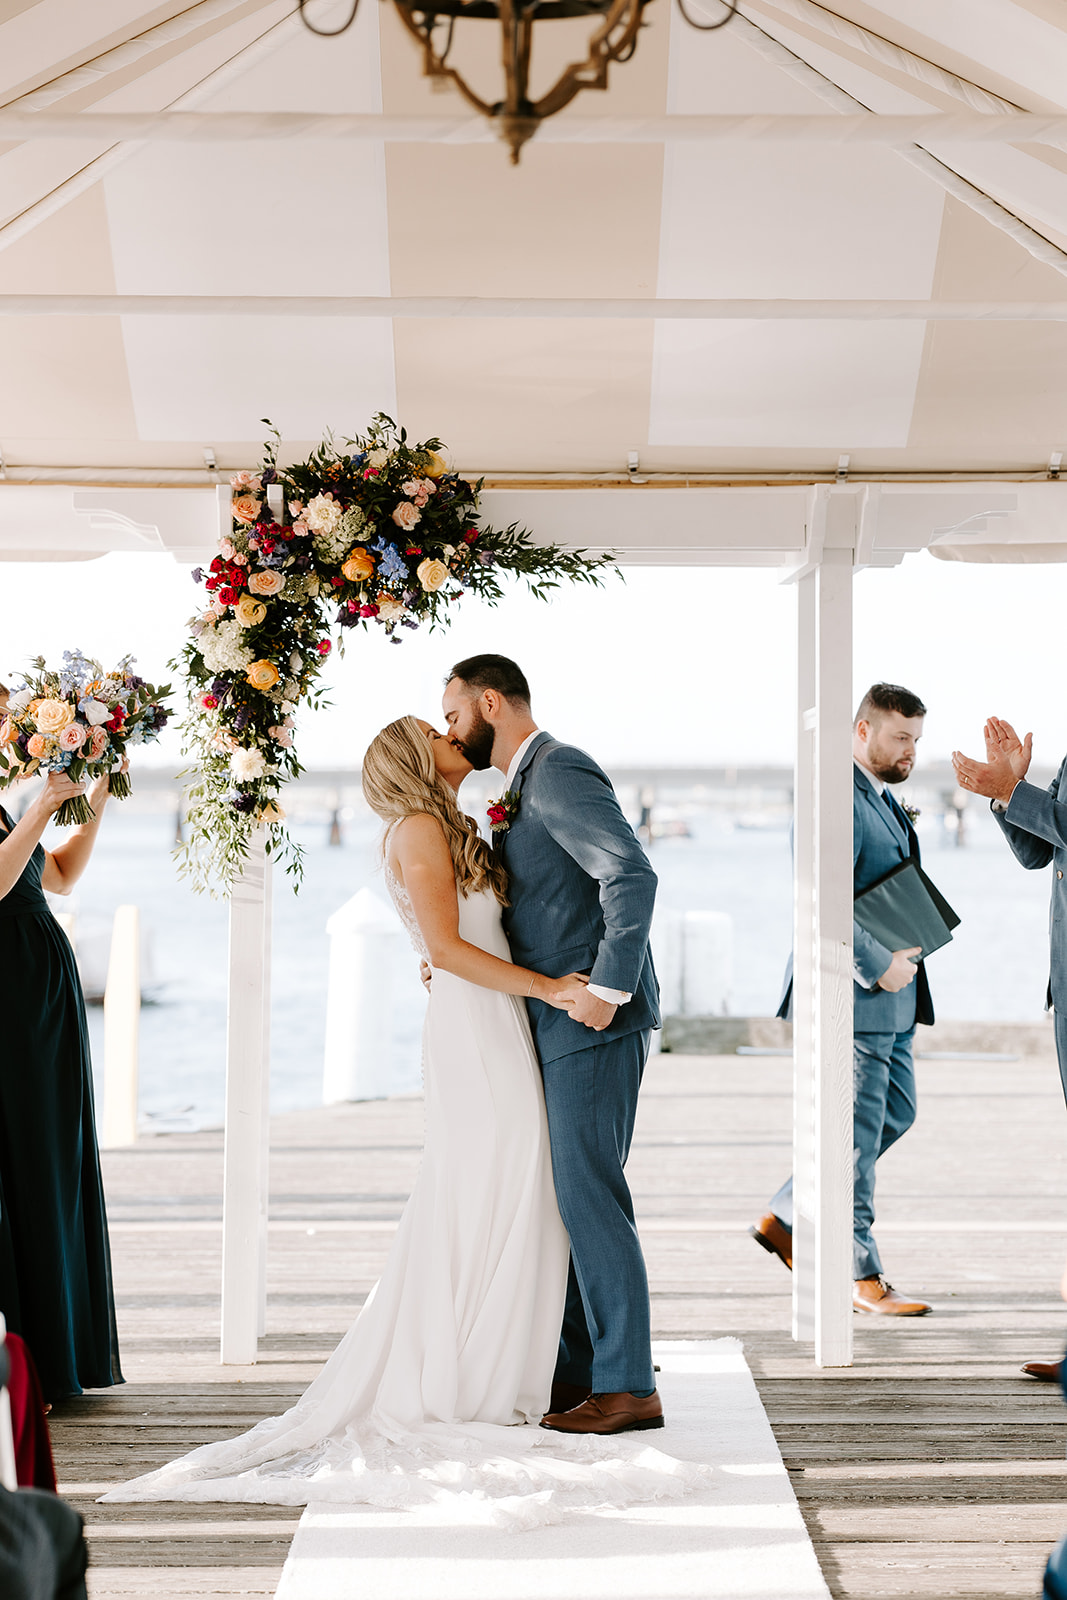 Stunning wedding ceremony with the marina in the background